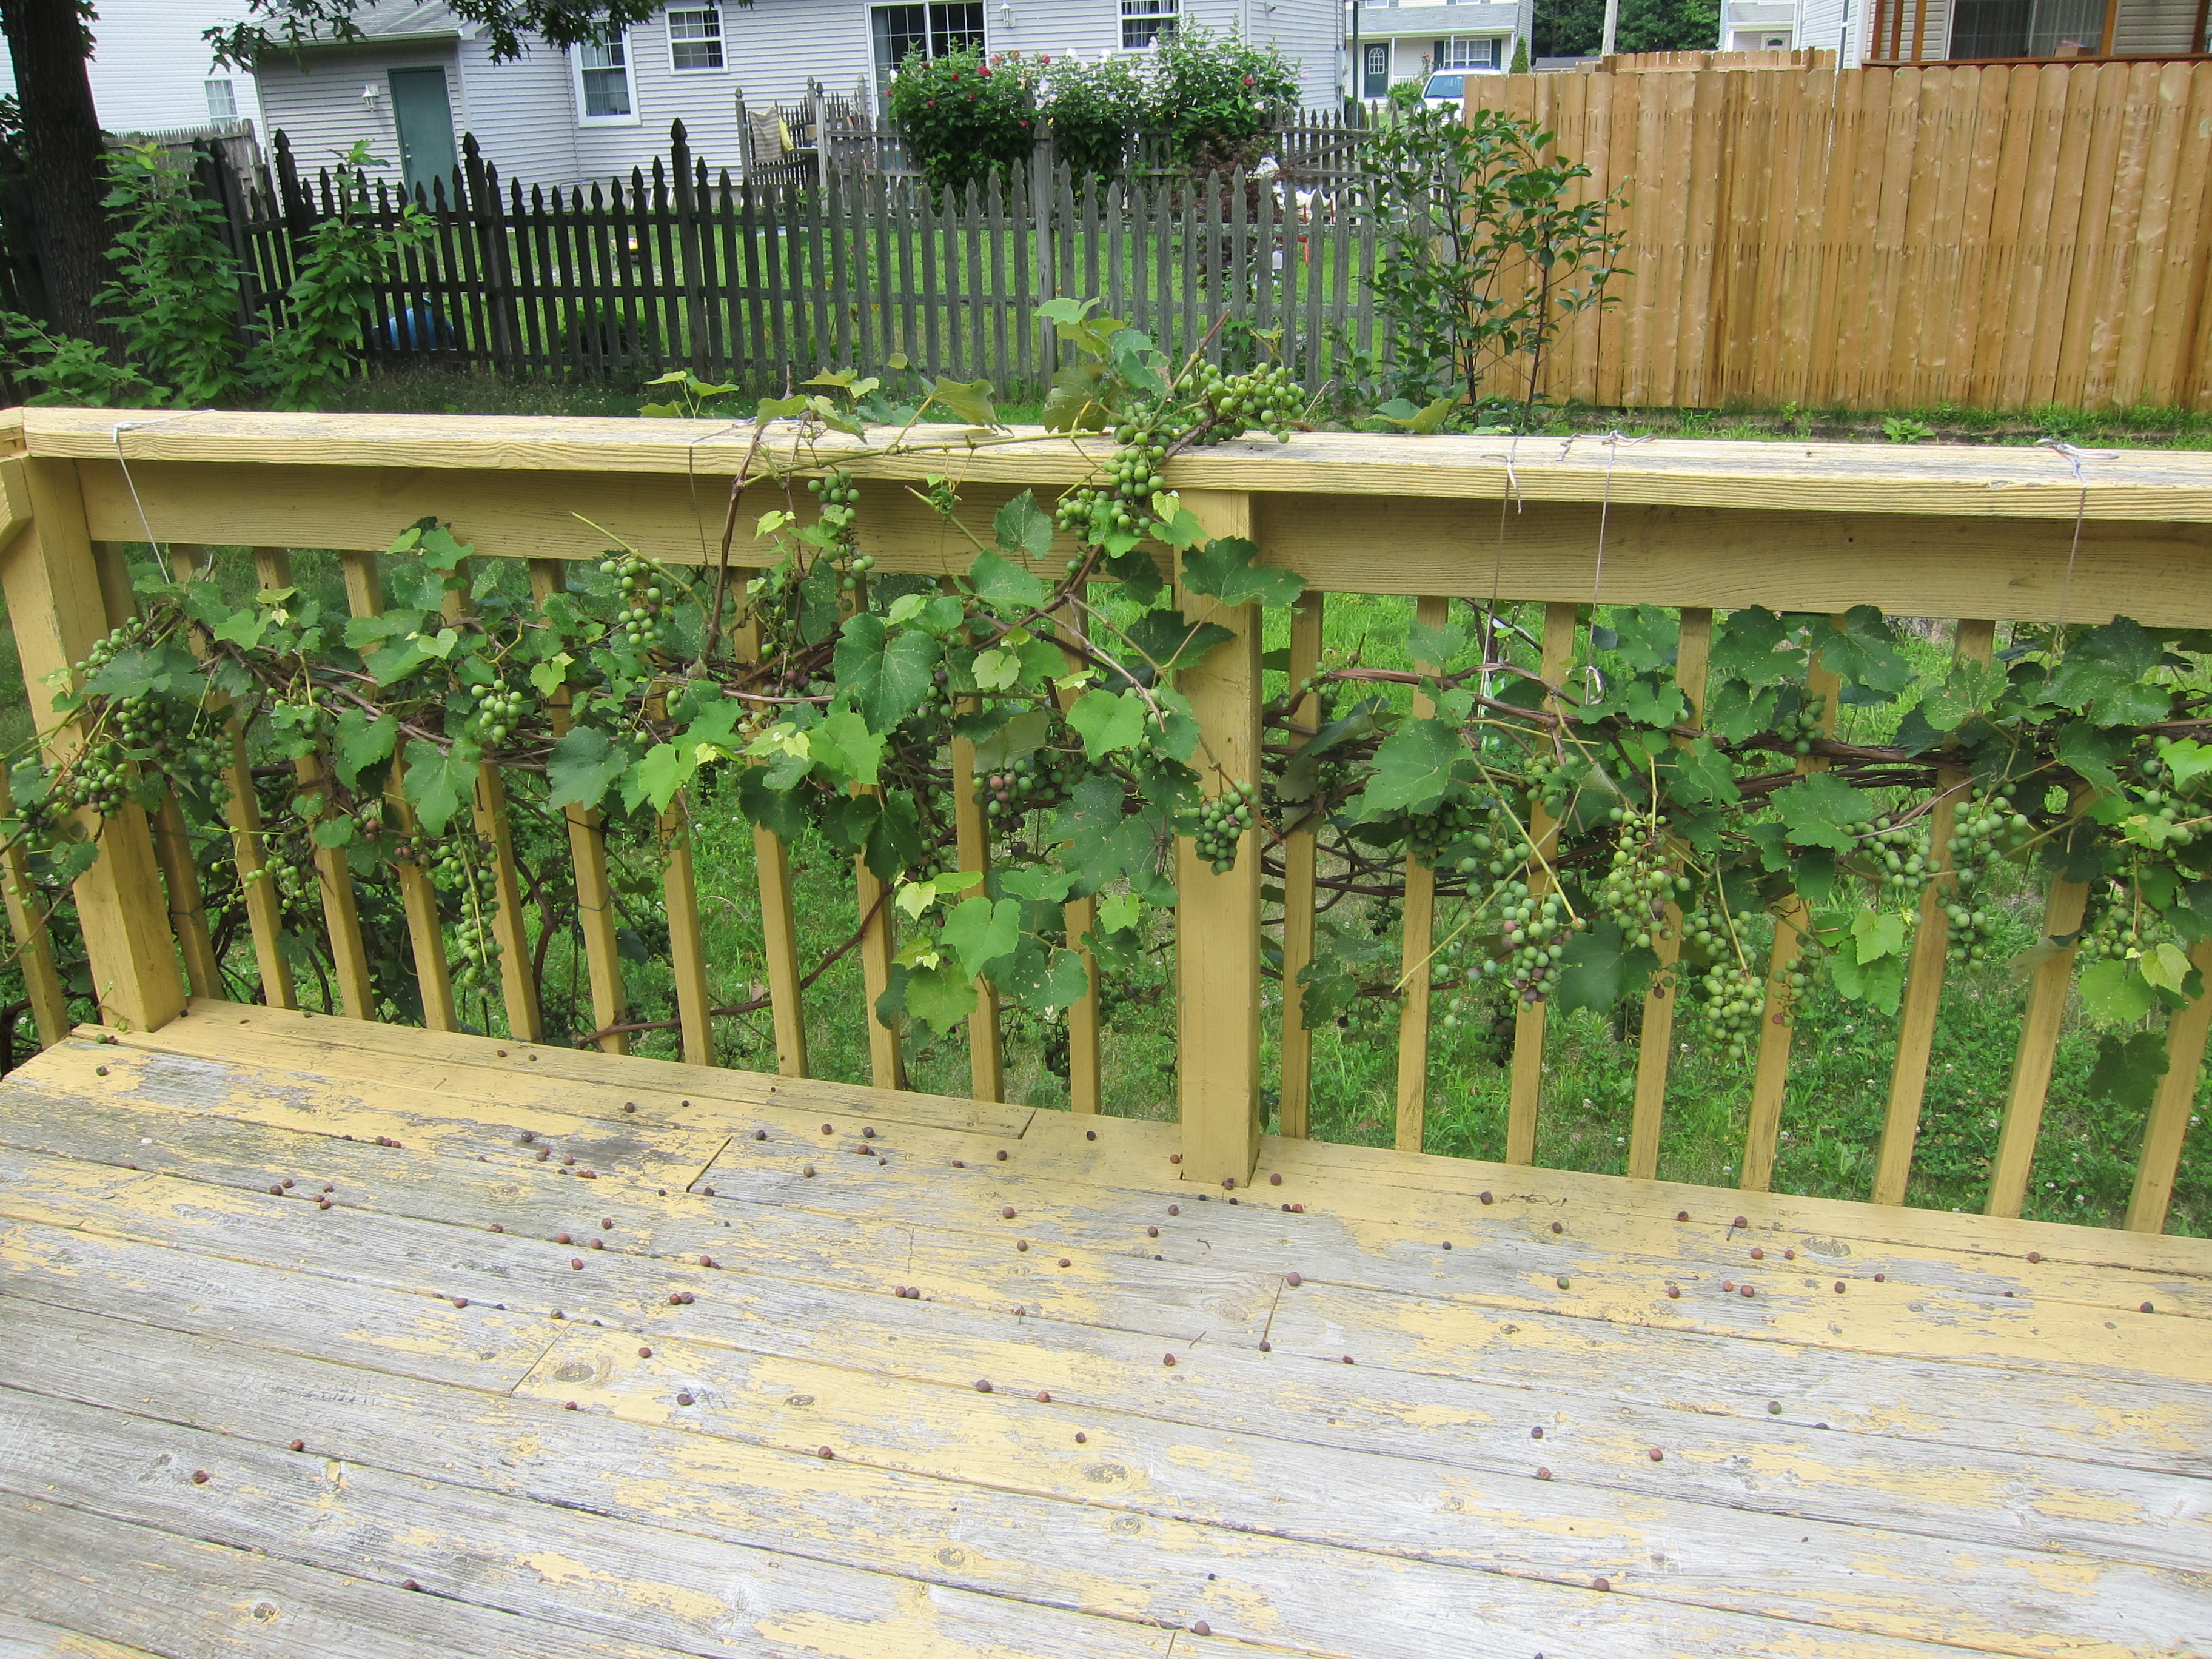 Sick grape vine - grapes get brown, shrink and die - Ask an Expert